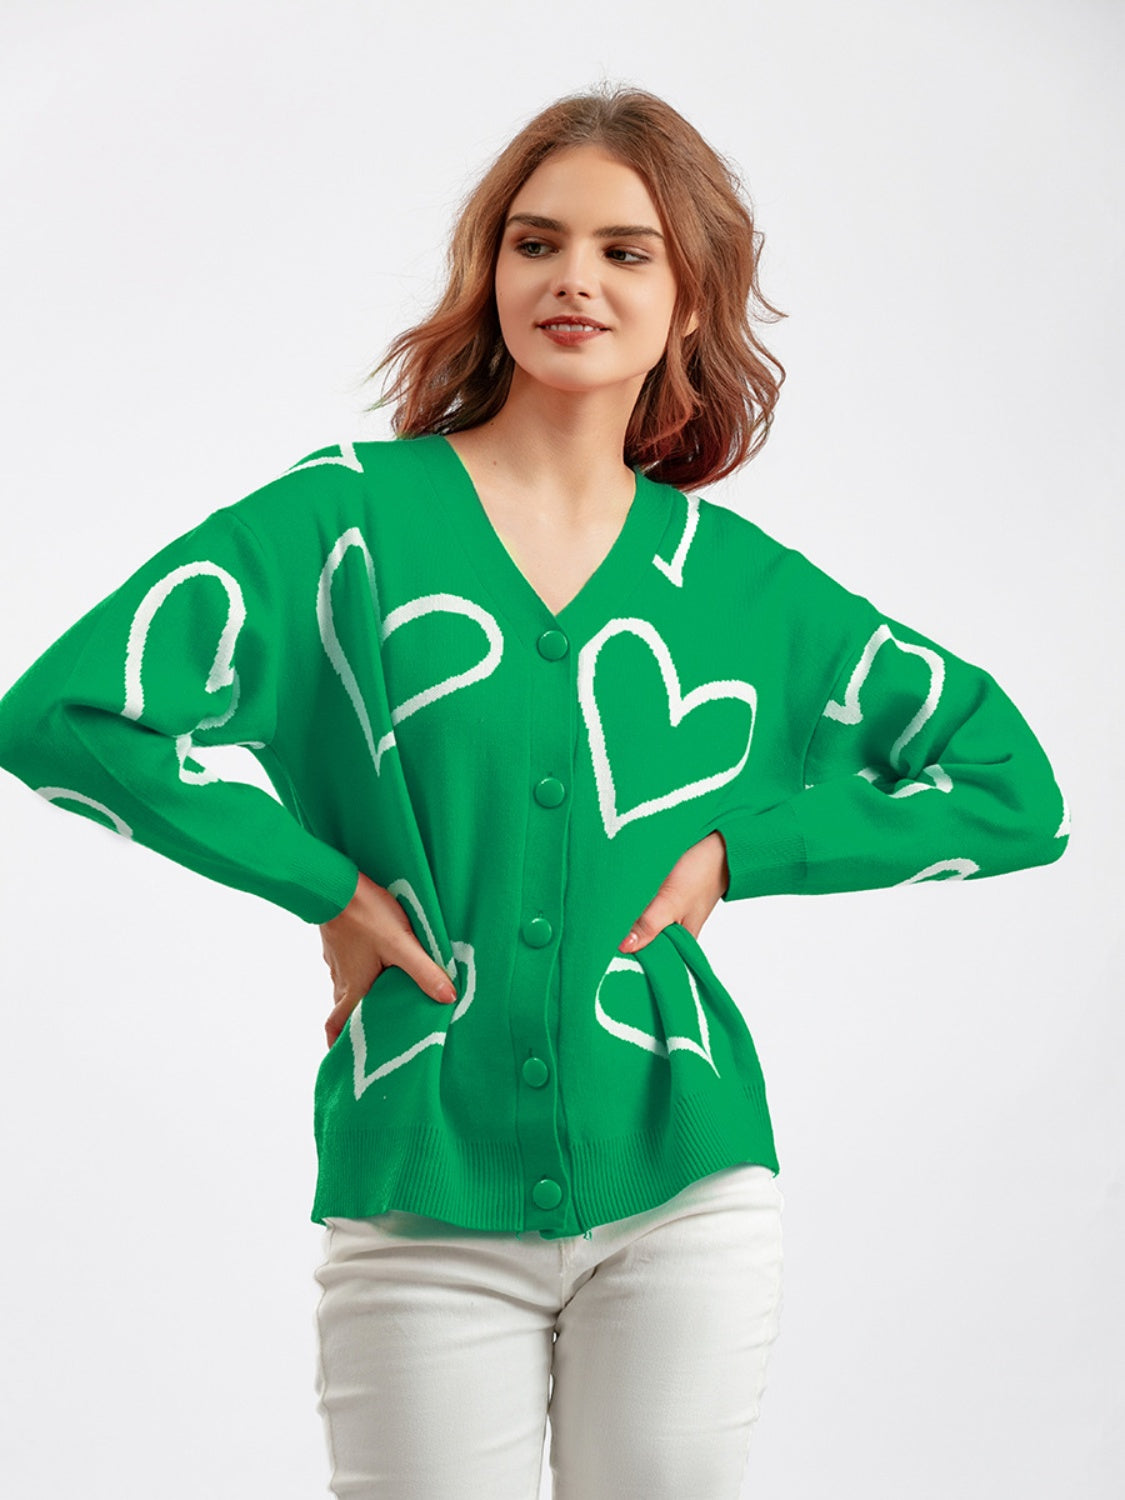 Heart Button Down Cardigan - Green / One Size - Women’s Clothing & Accessories - Shirts & Tops - 10 - 2024